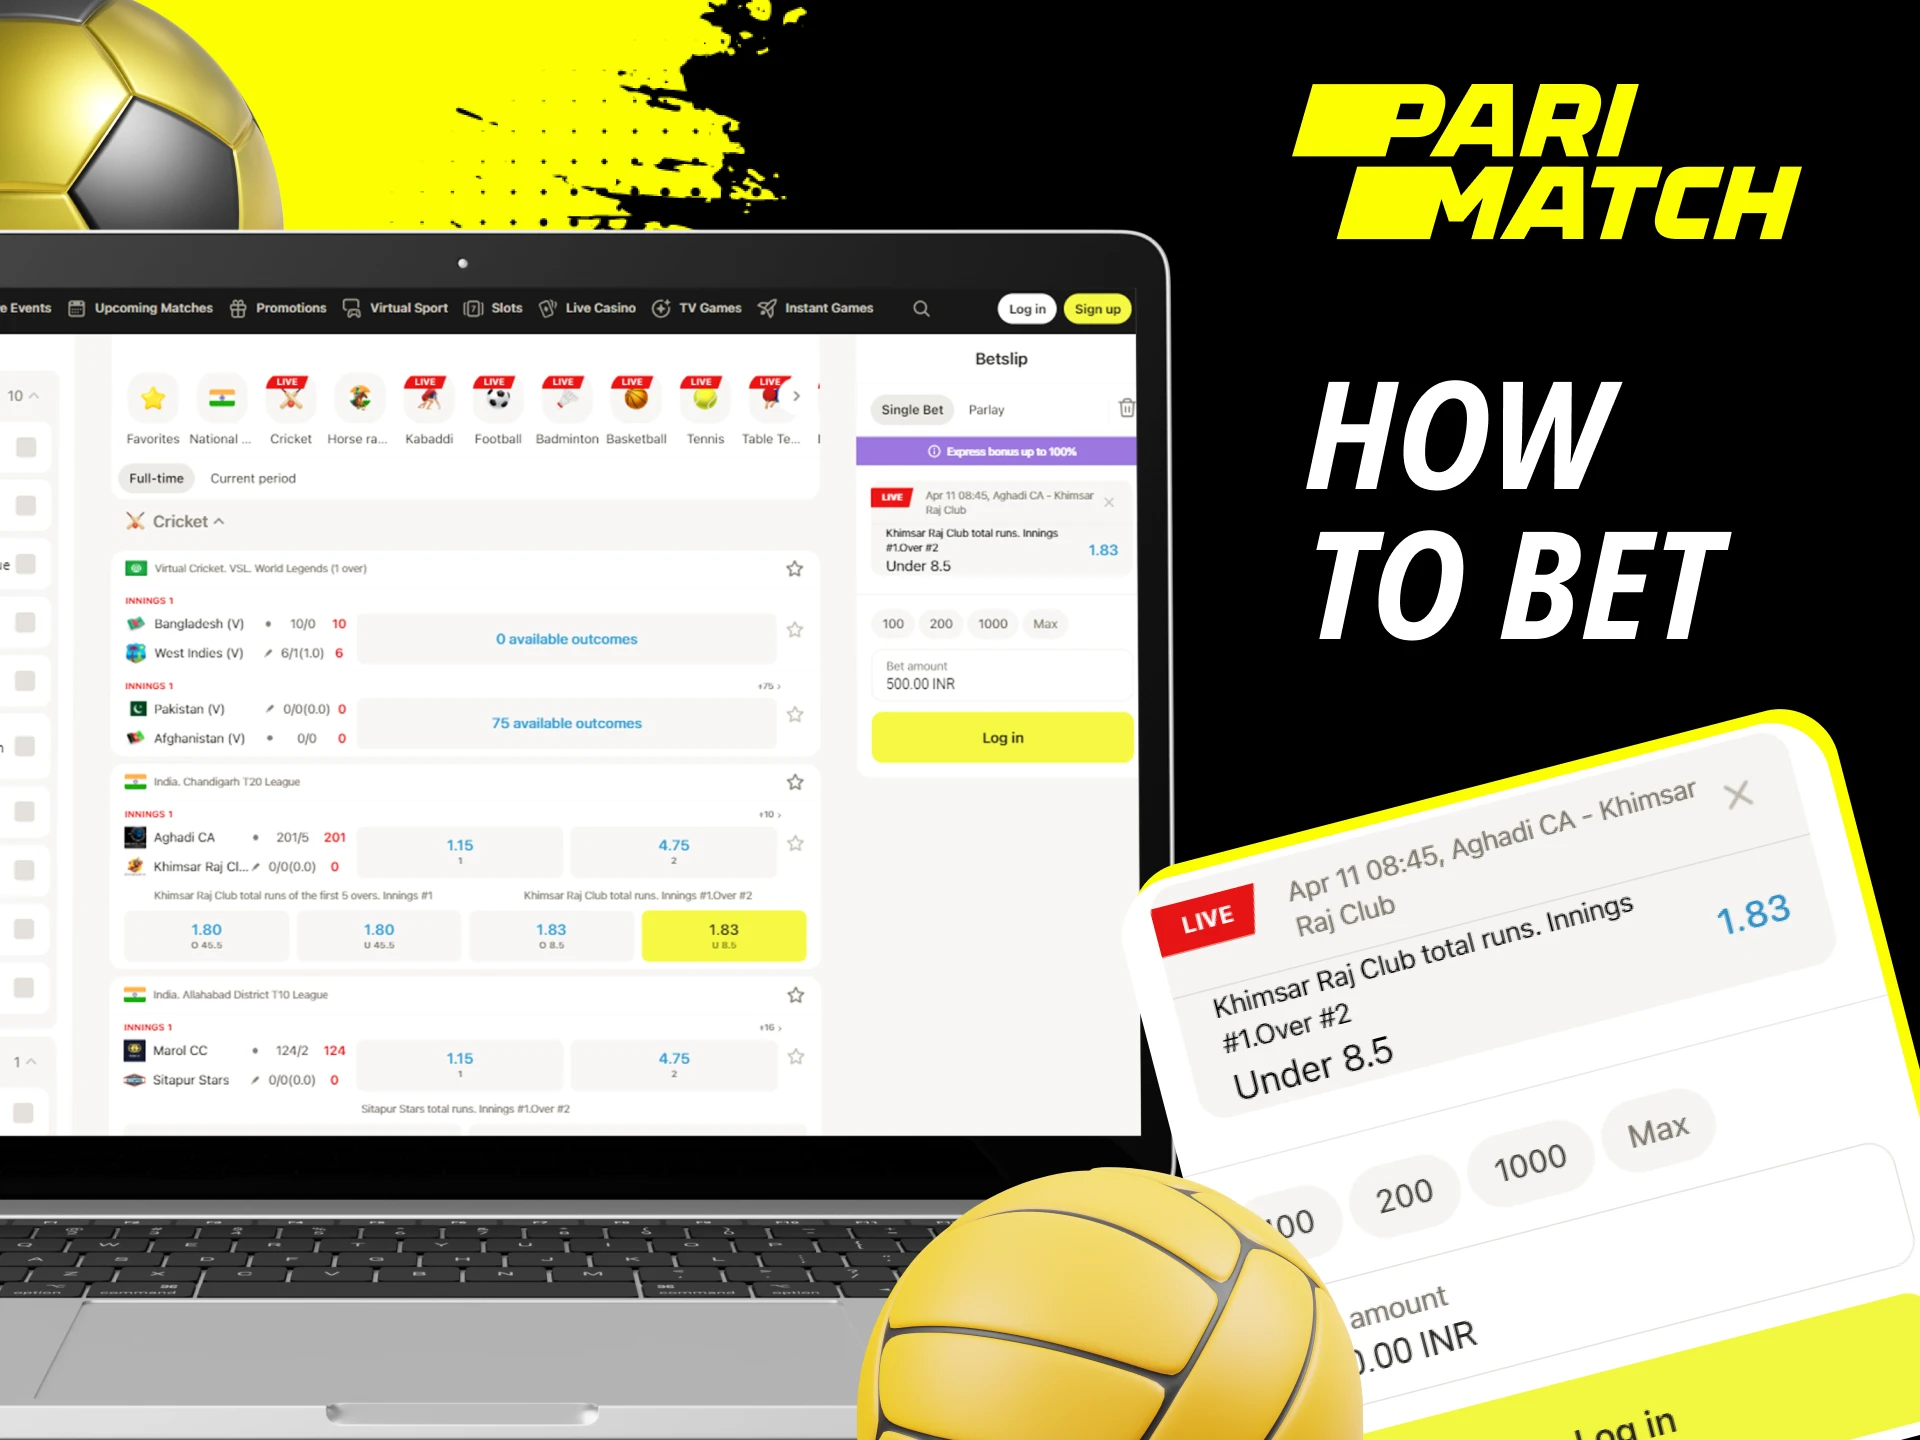 What does a player need to do to be able to place bets on the Parimatch online casino website.